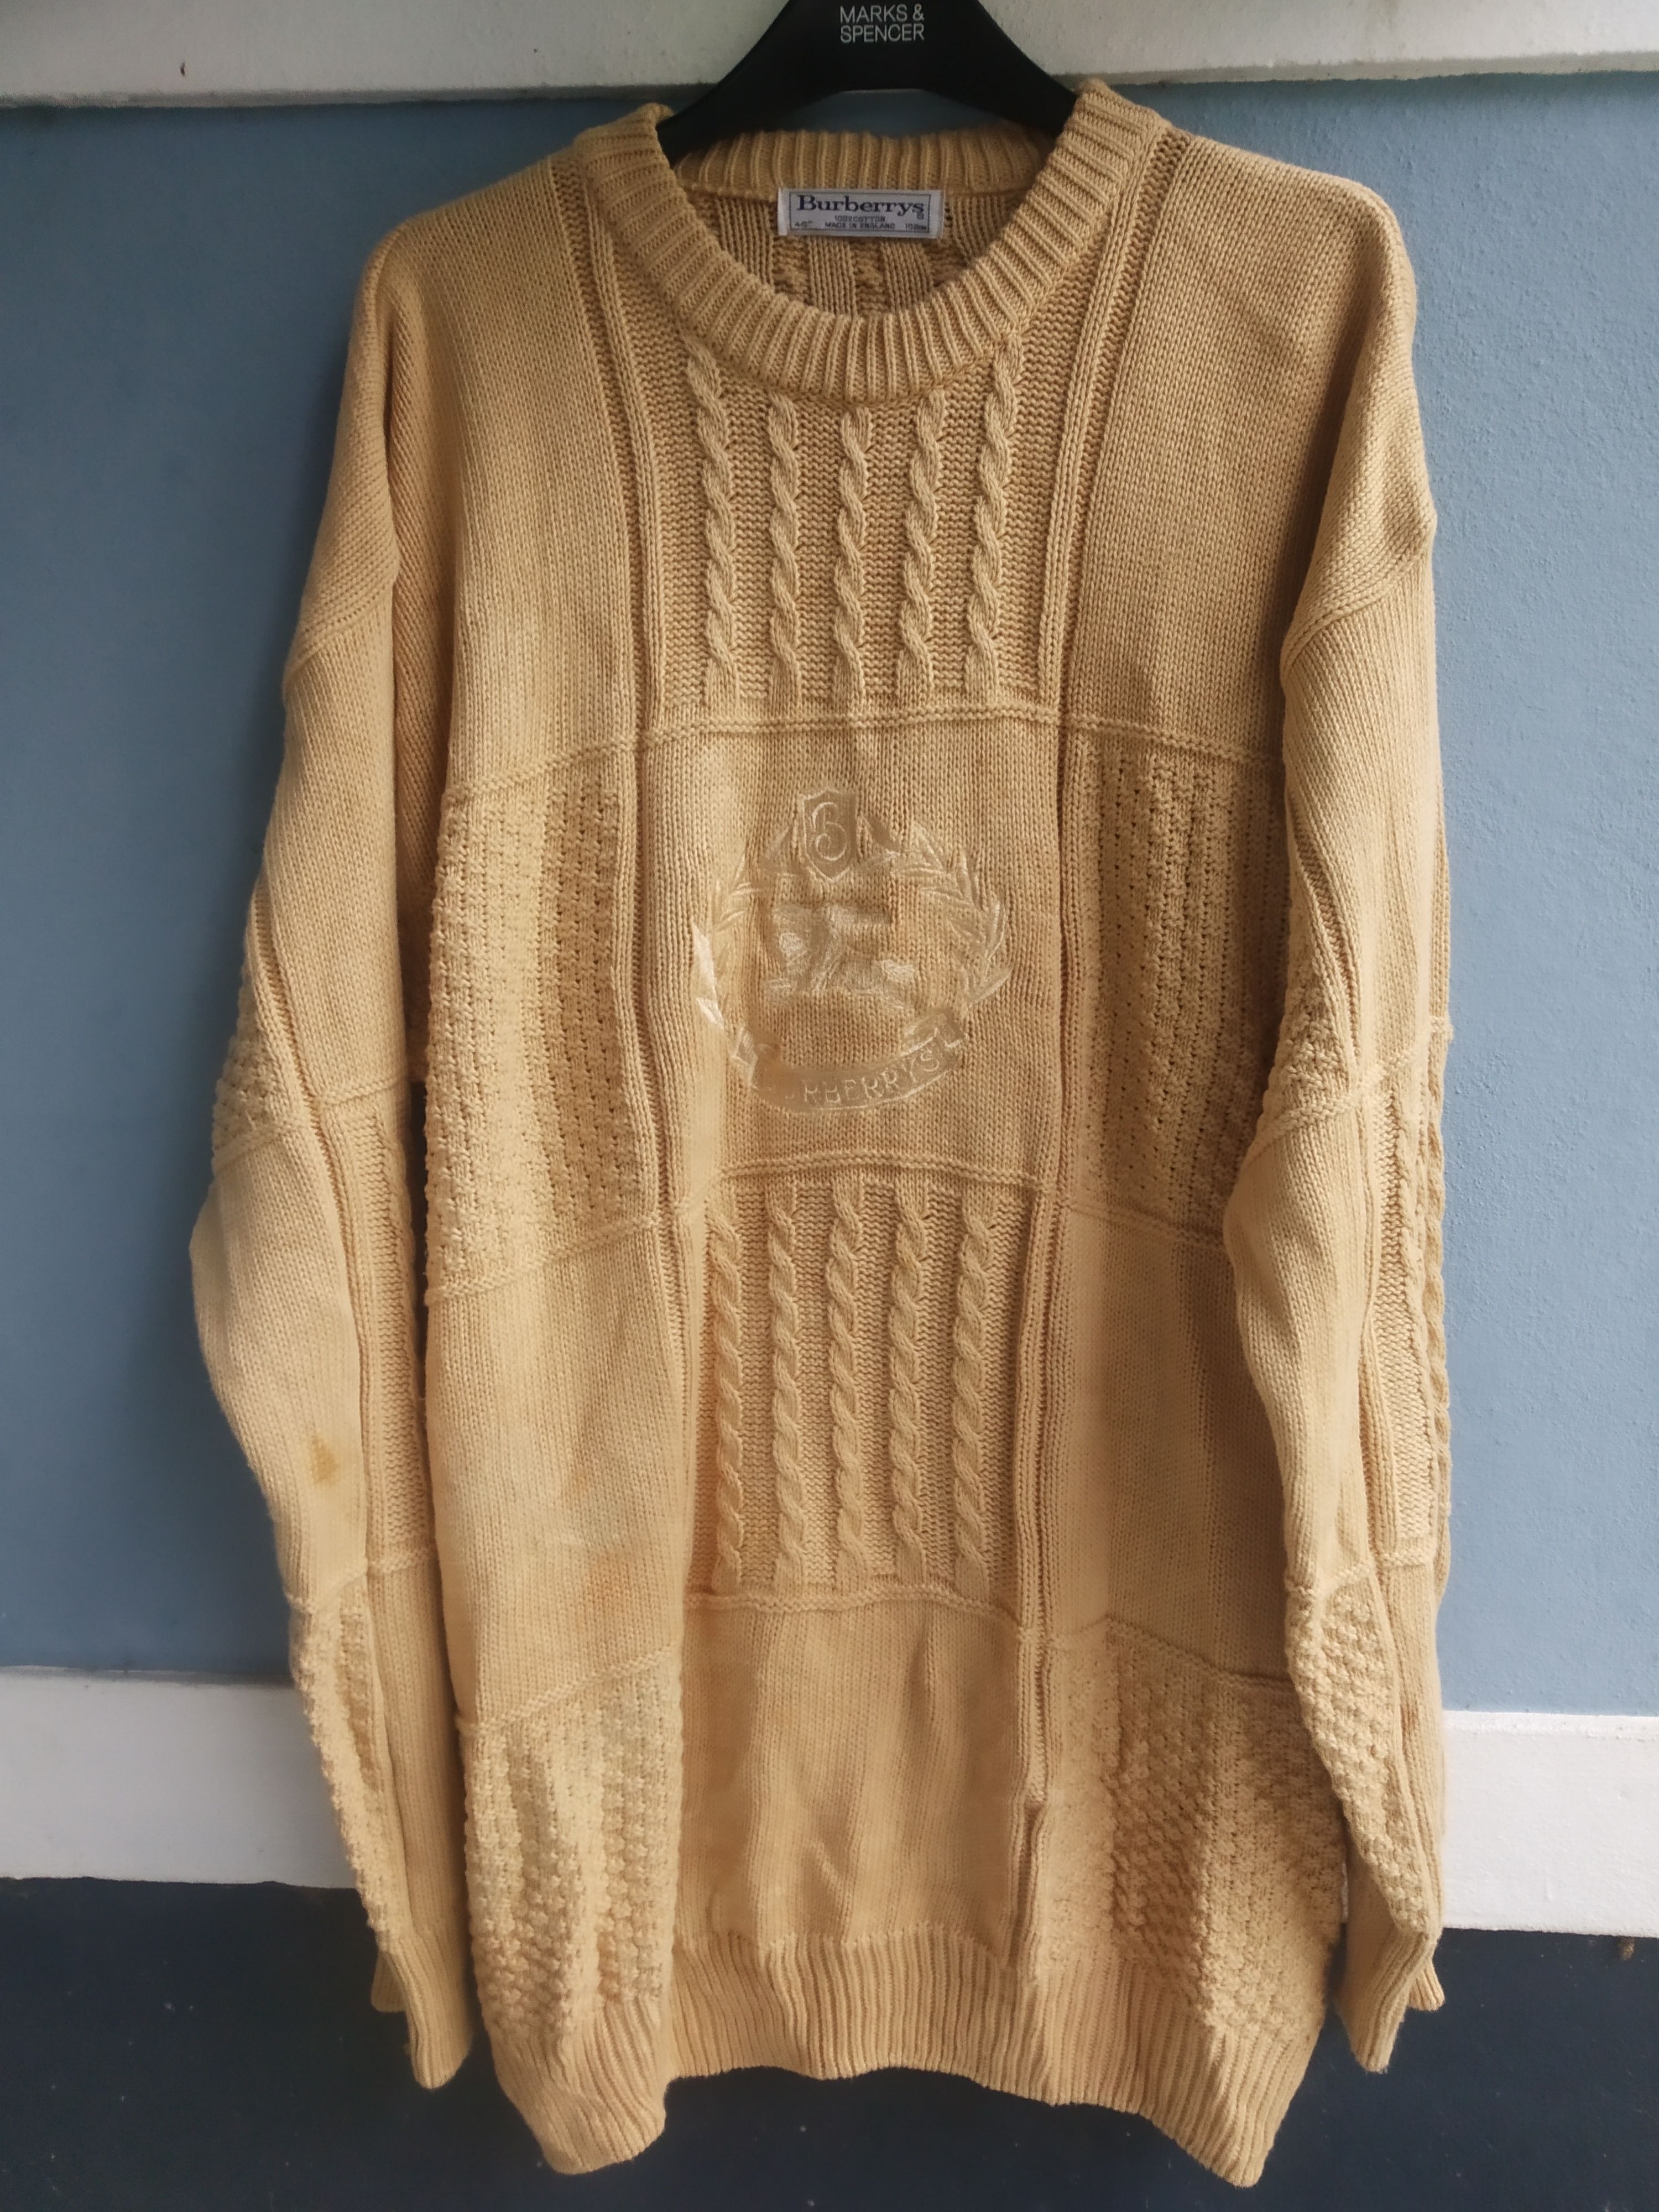 Vintage knitwear Burberry made in England | Grailed